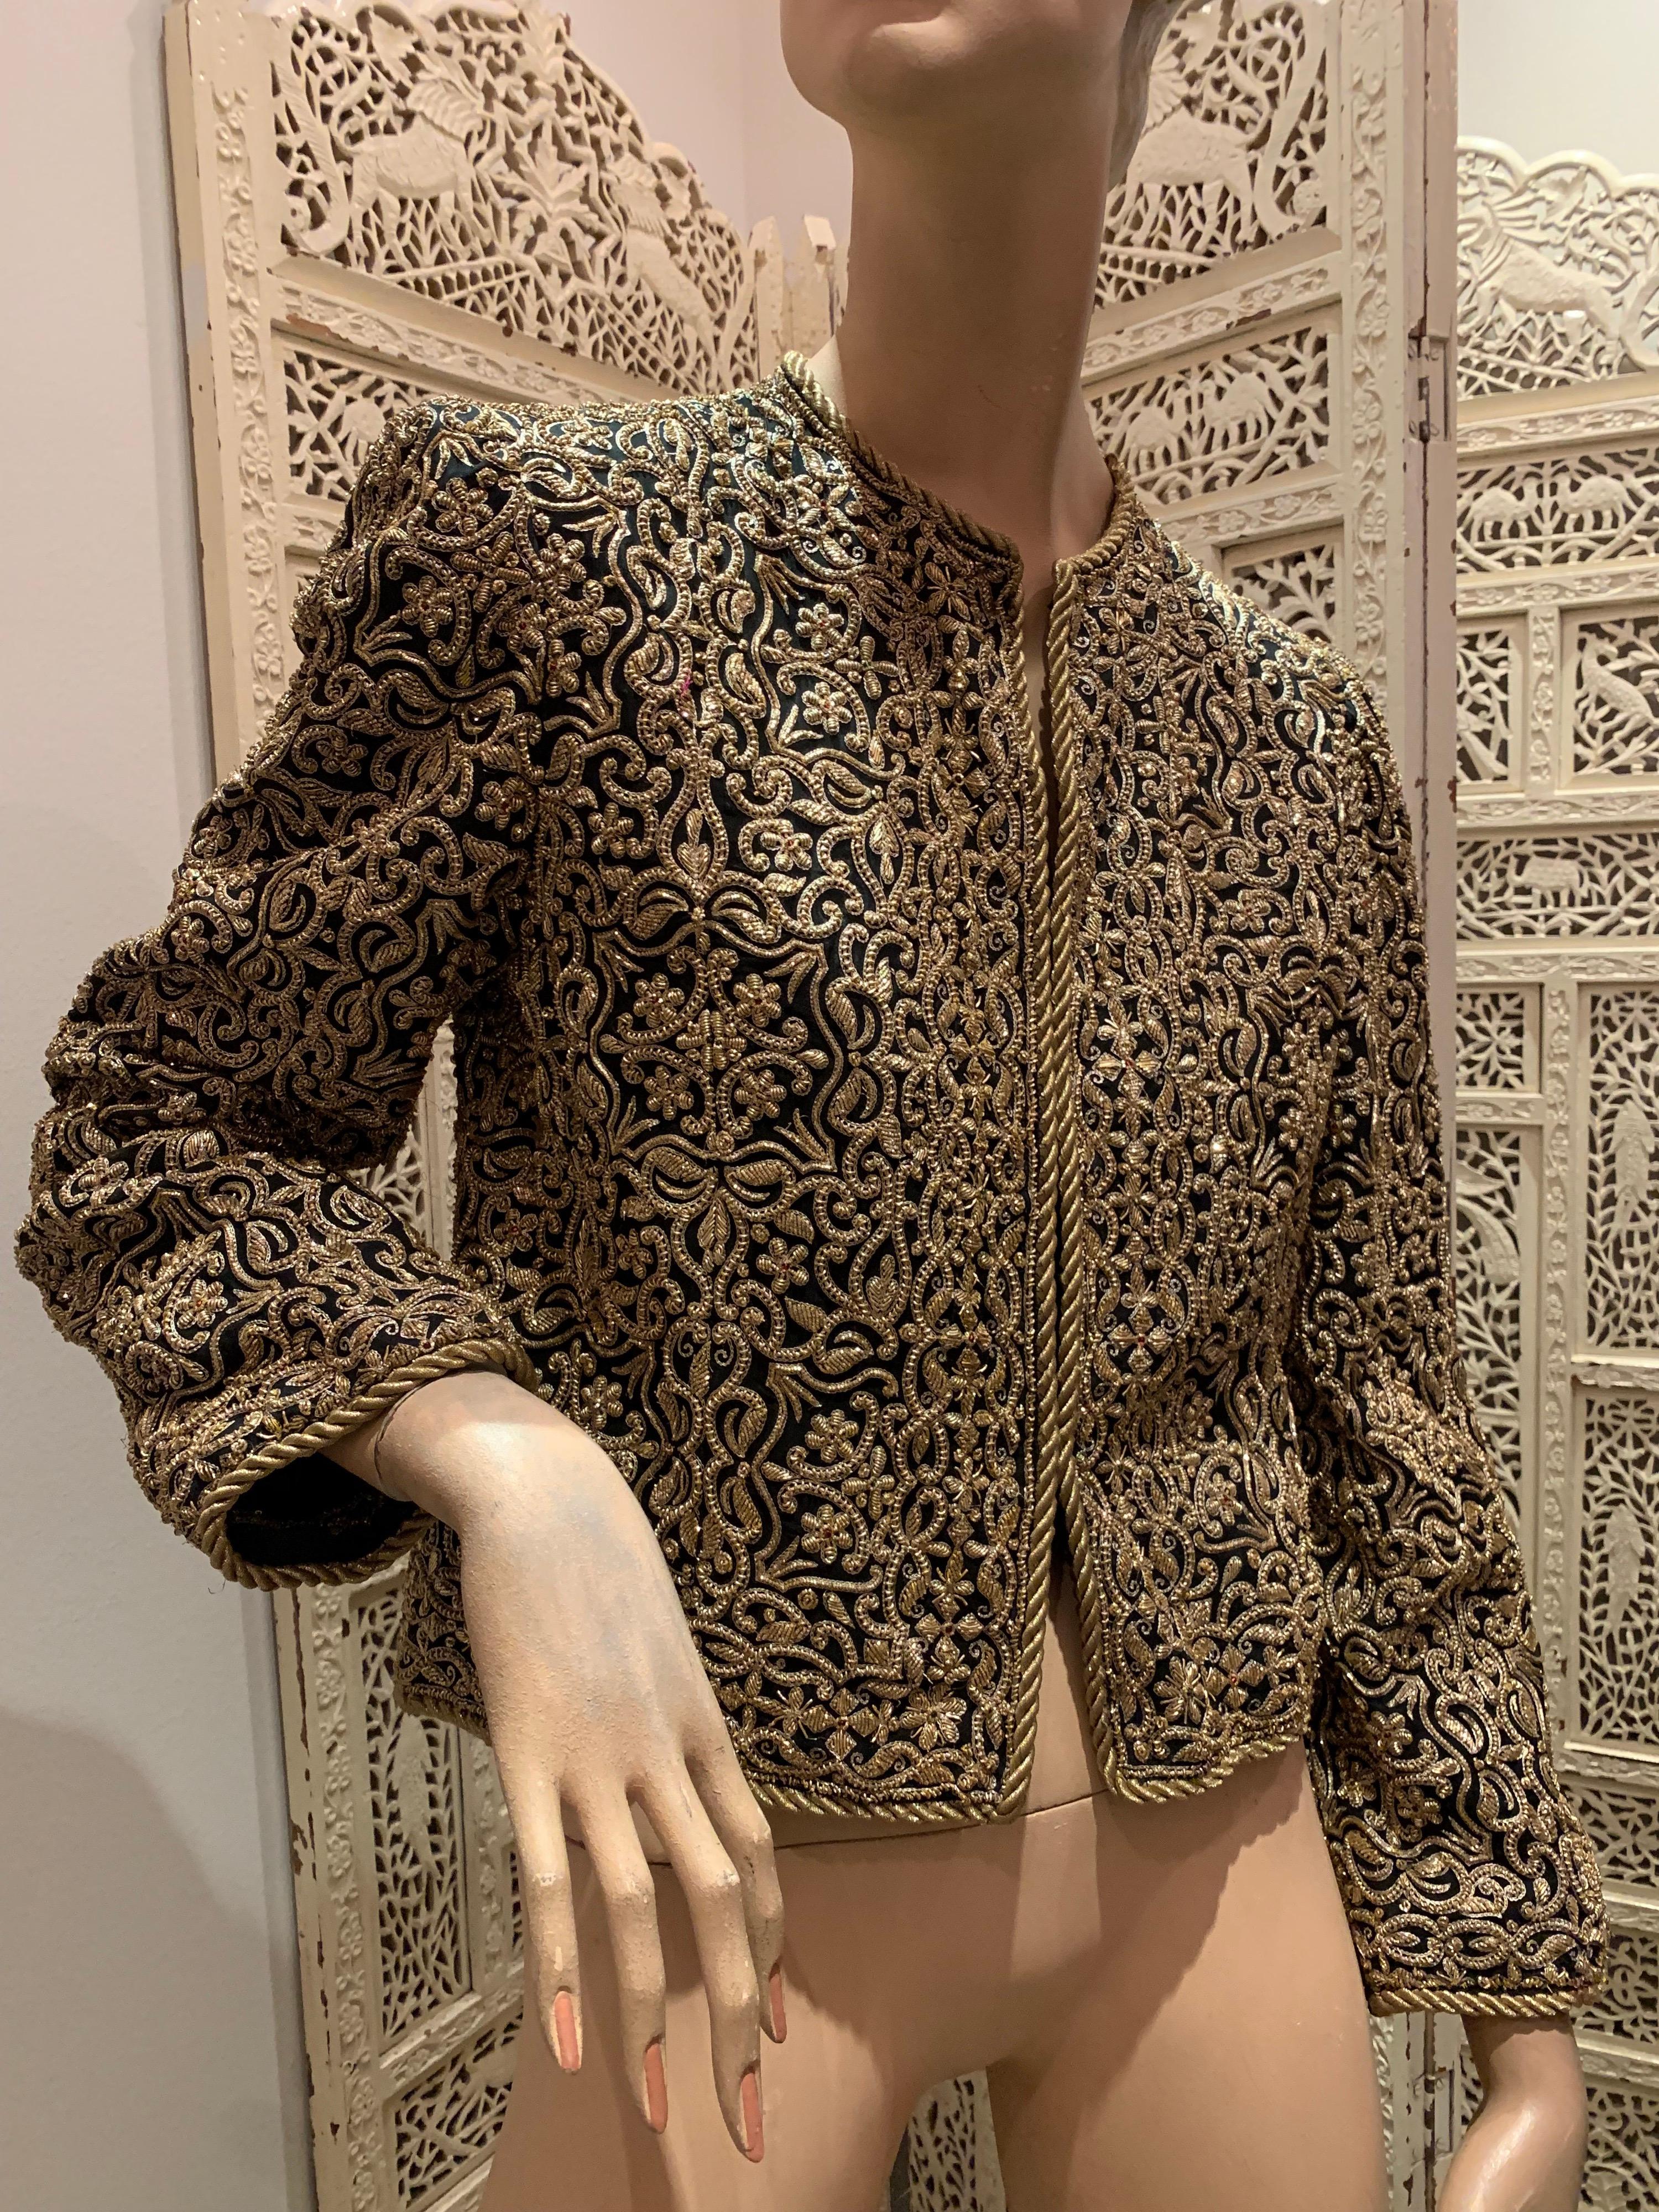 A stunning 1980s Bill Blass evening jacket of traditional Indian inspiration. Heavily encrusted all over with chain embroidery gold work. Imported fabric. Gold roping at hems and cuffs. Fully lined with hook and eye closures.  